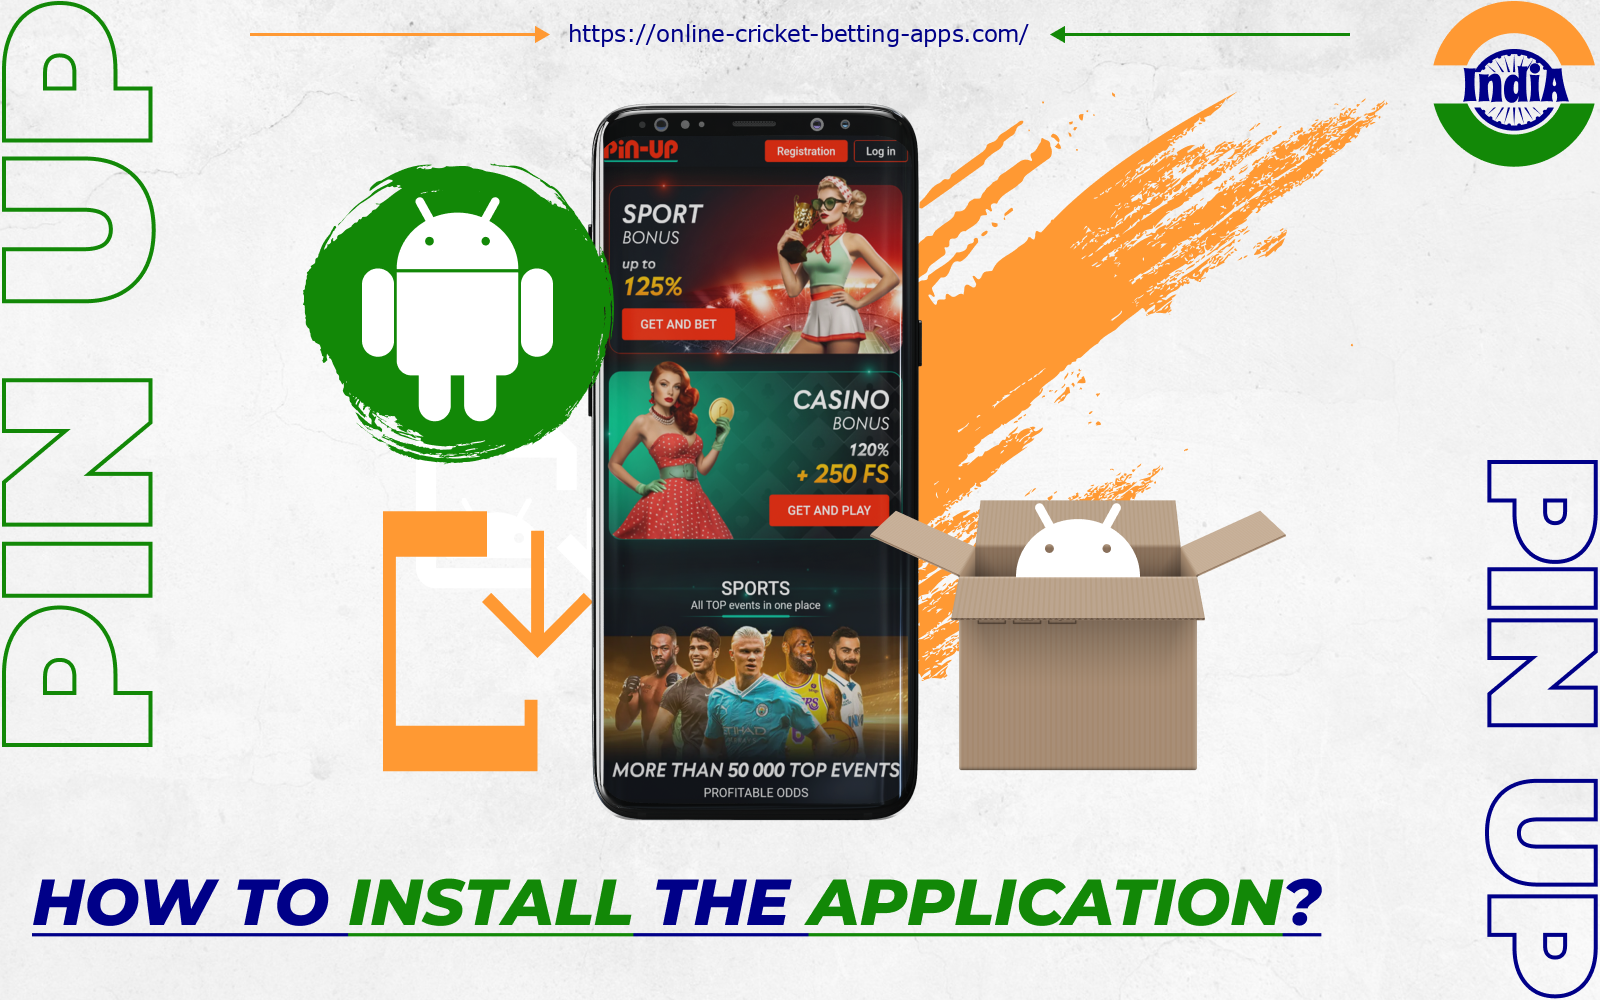 After downloading the Pin Up APK file, players from India can install the app on their smartphone